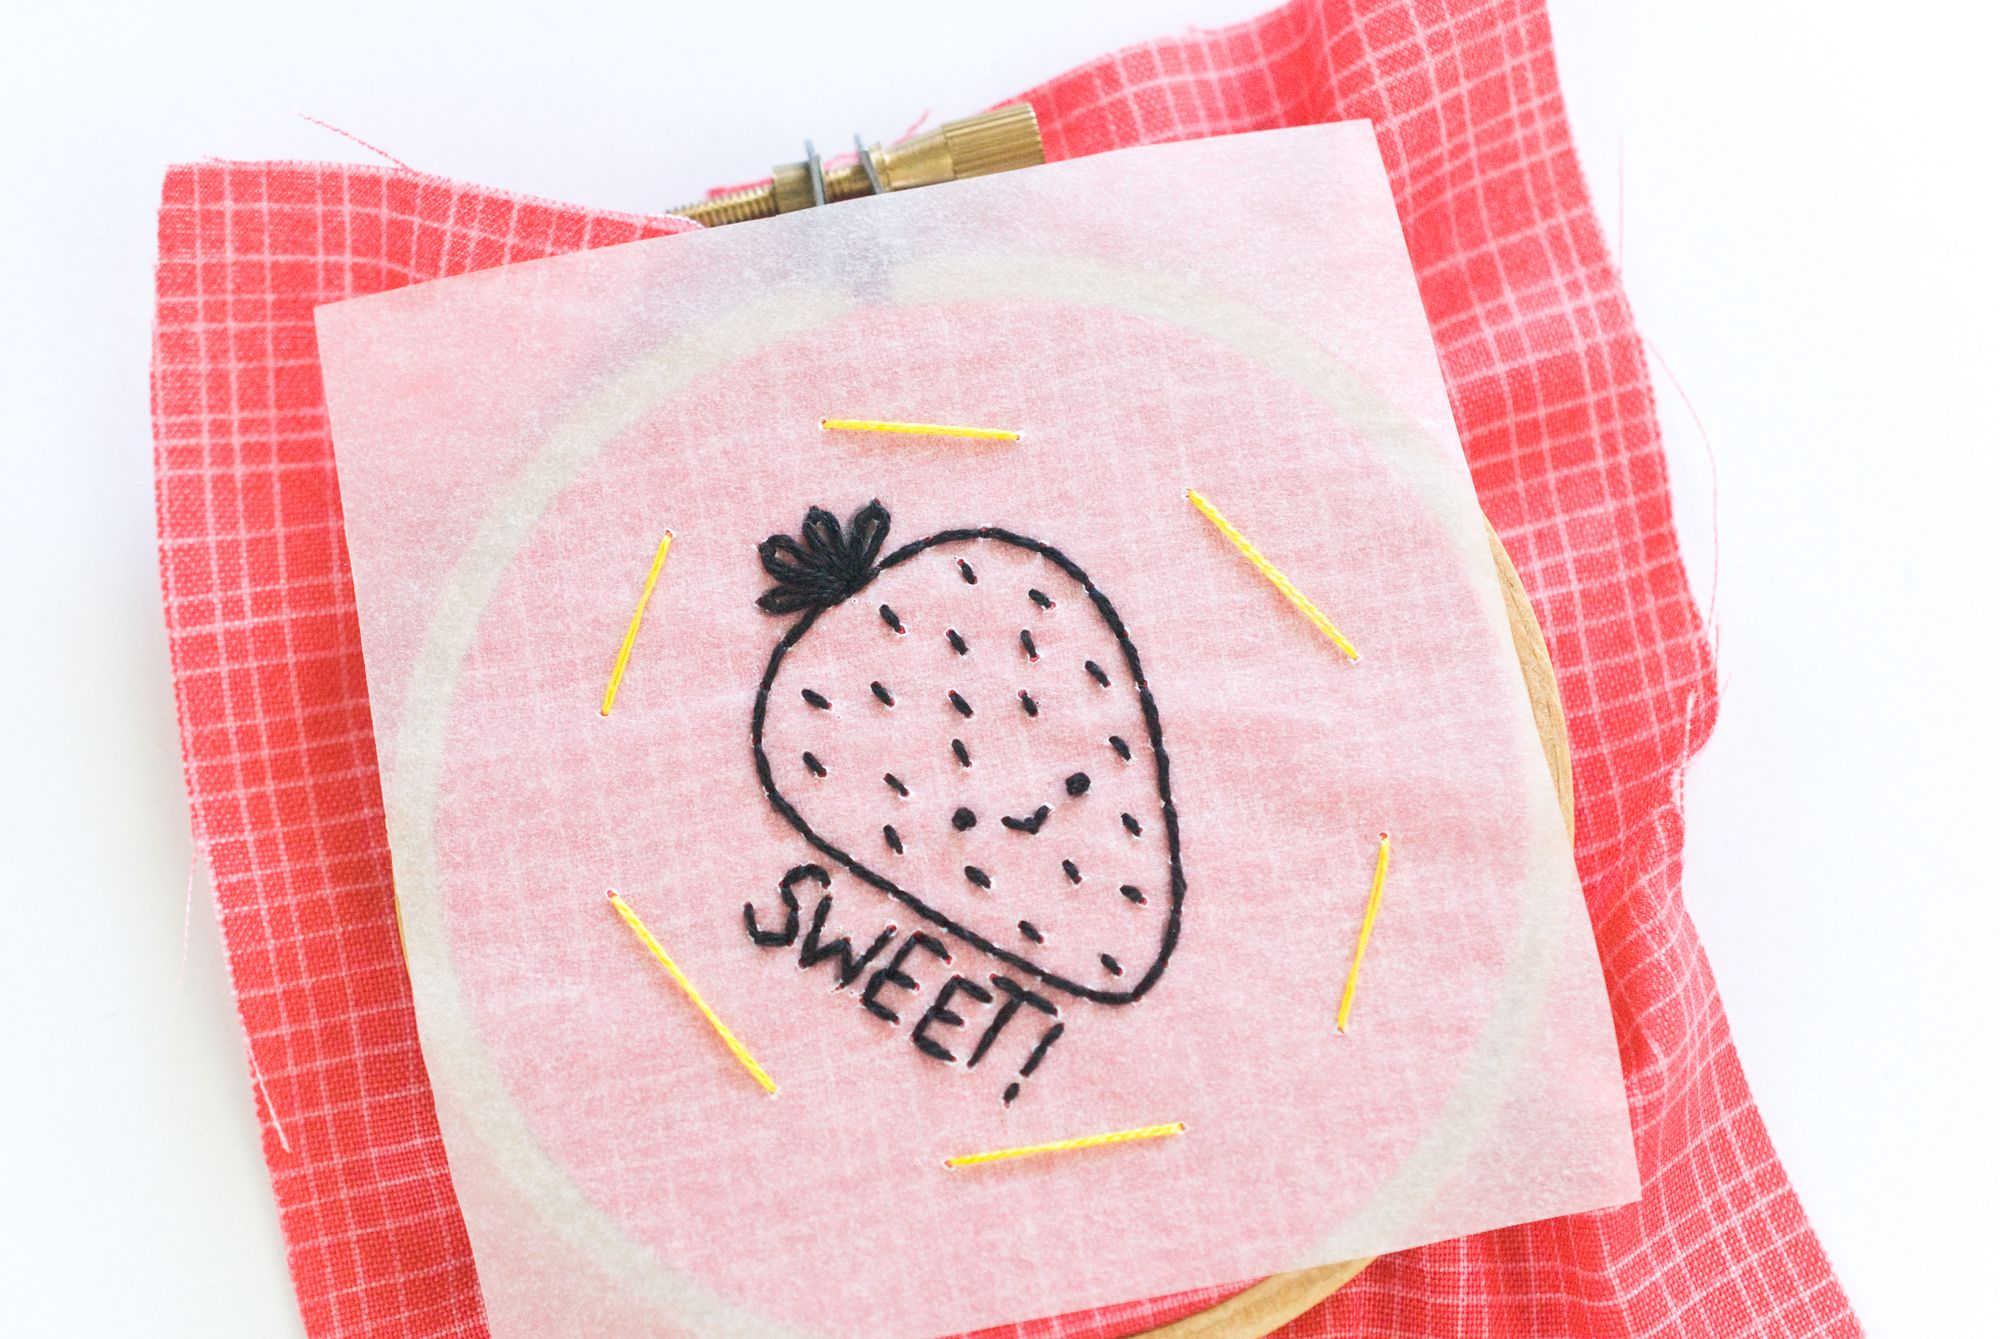 Strawberry Embroidery Pattern Using The Tracing Paper Embroidery Transfer Method